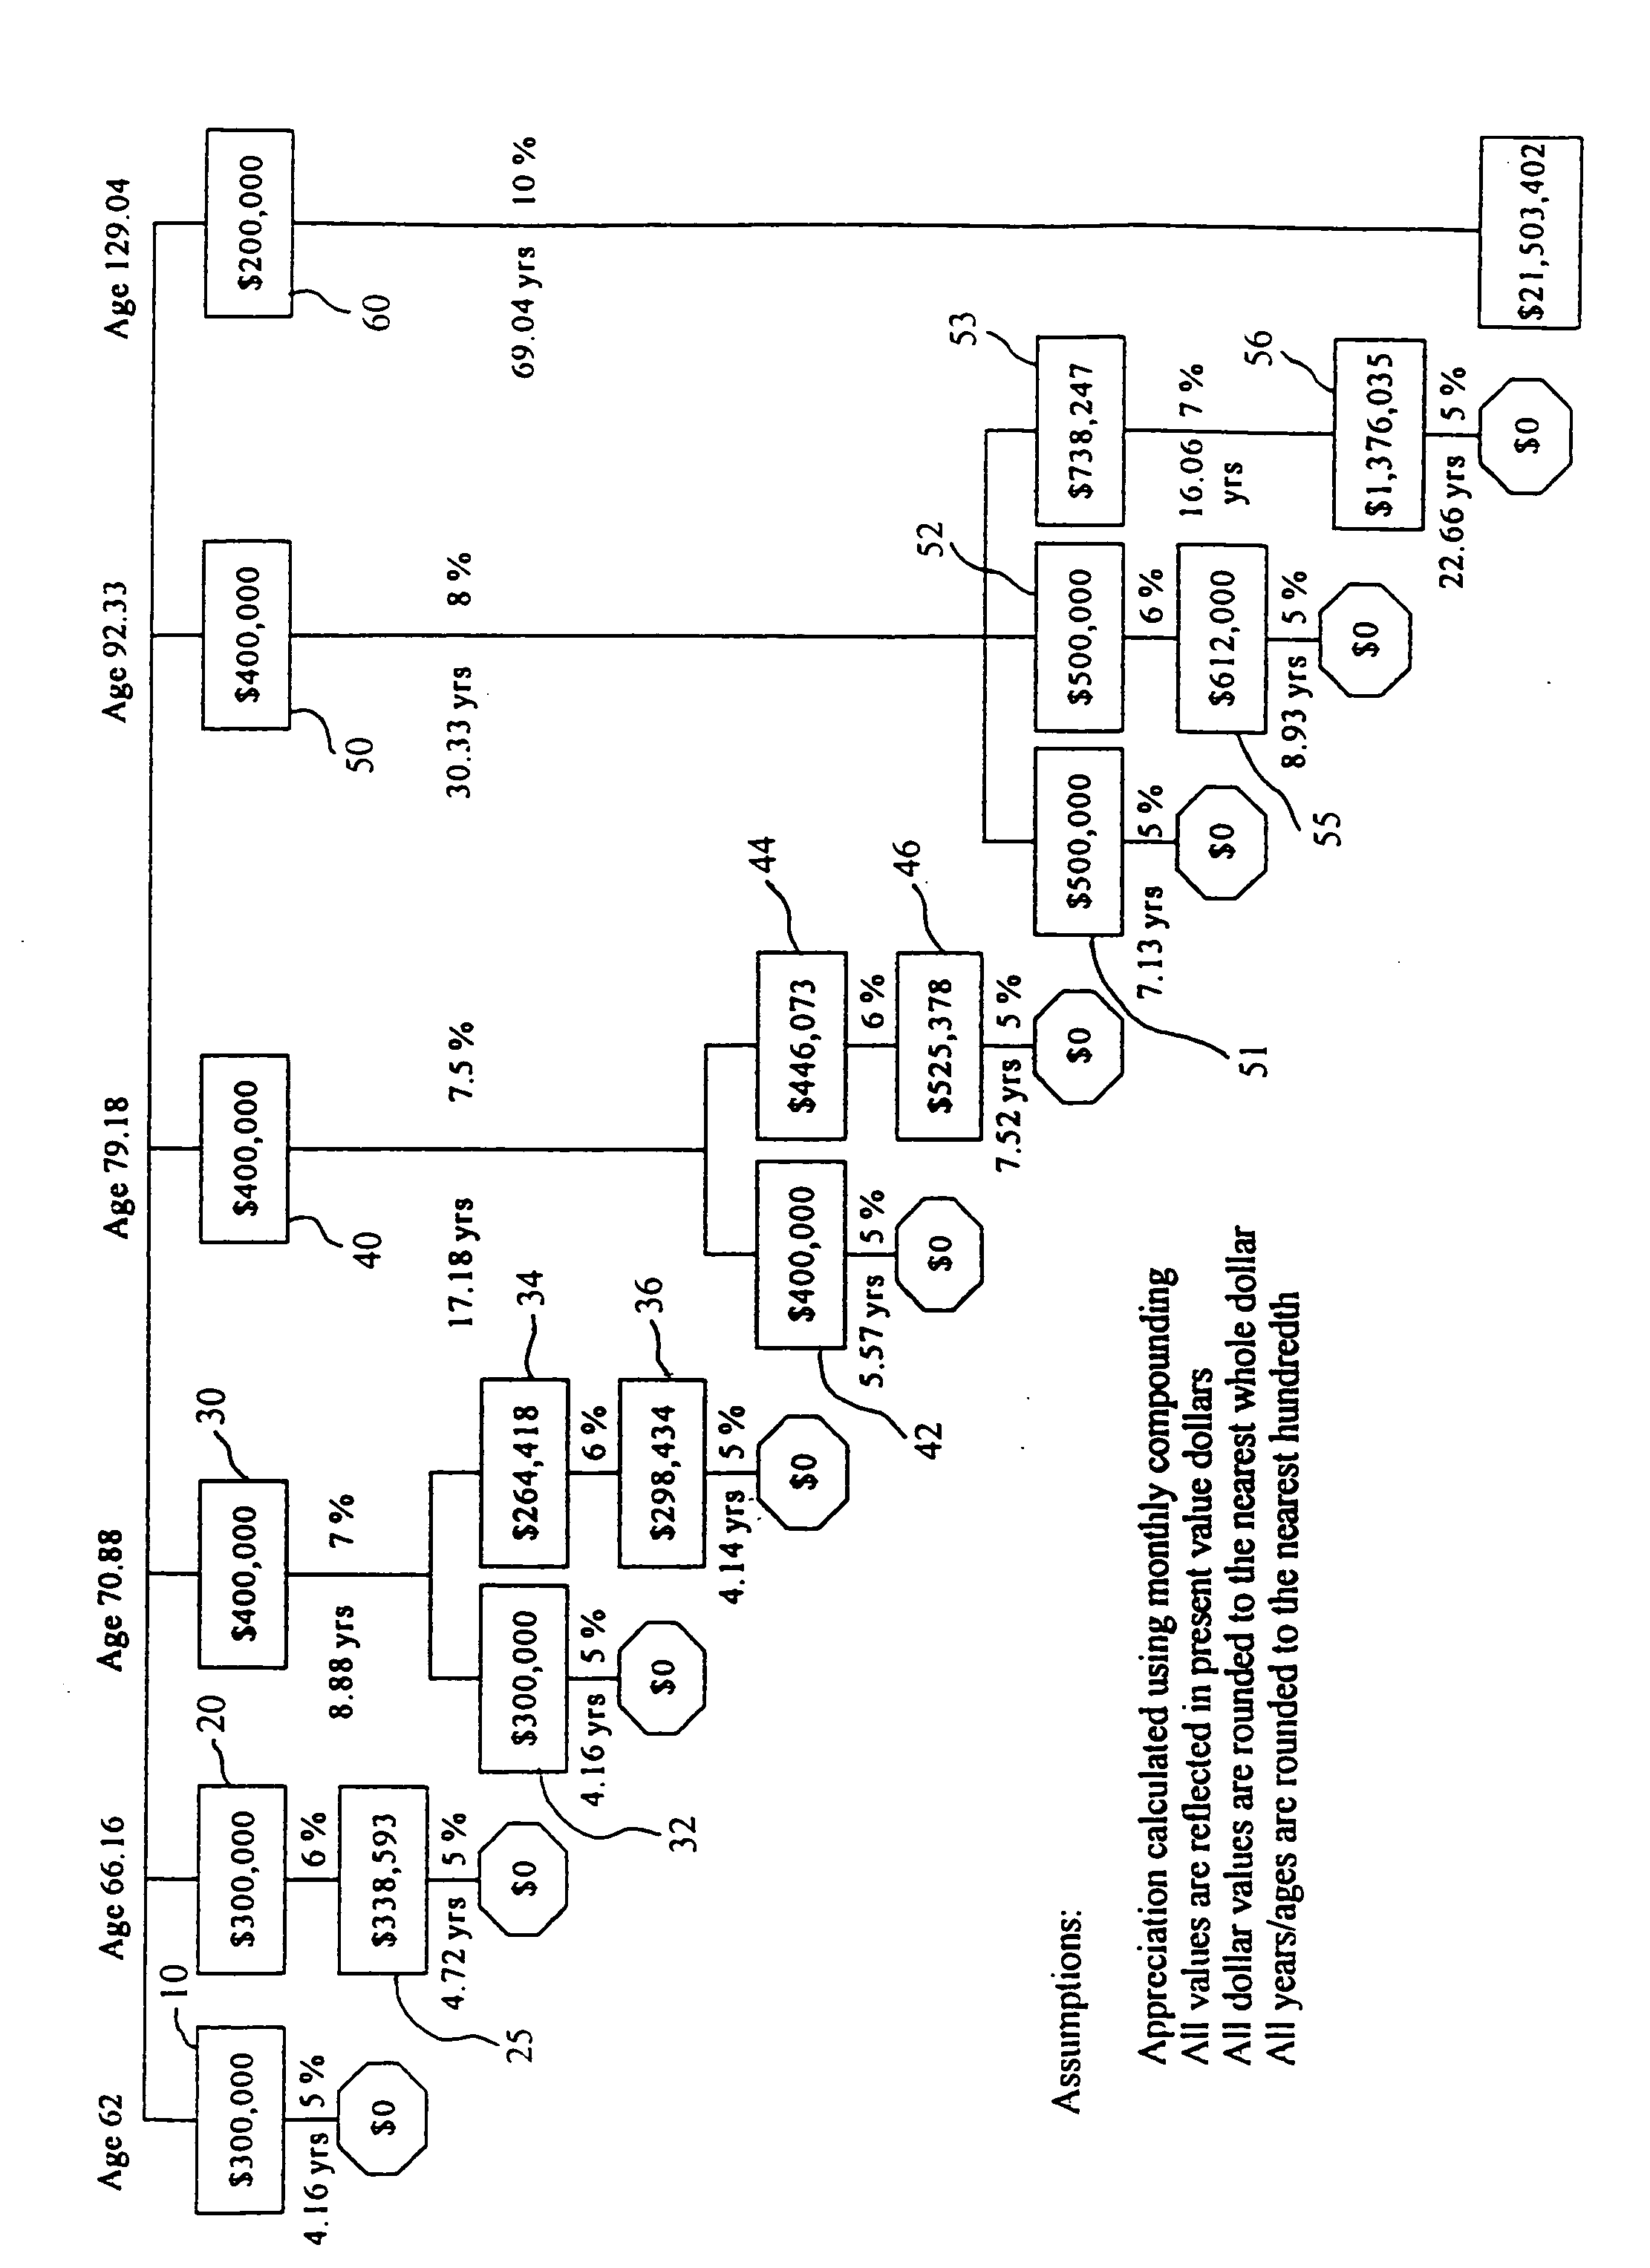 Method for efficient investment and distribution of assets